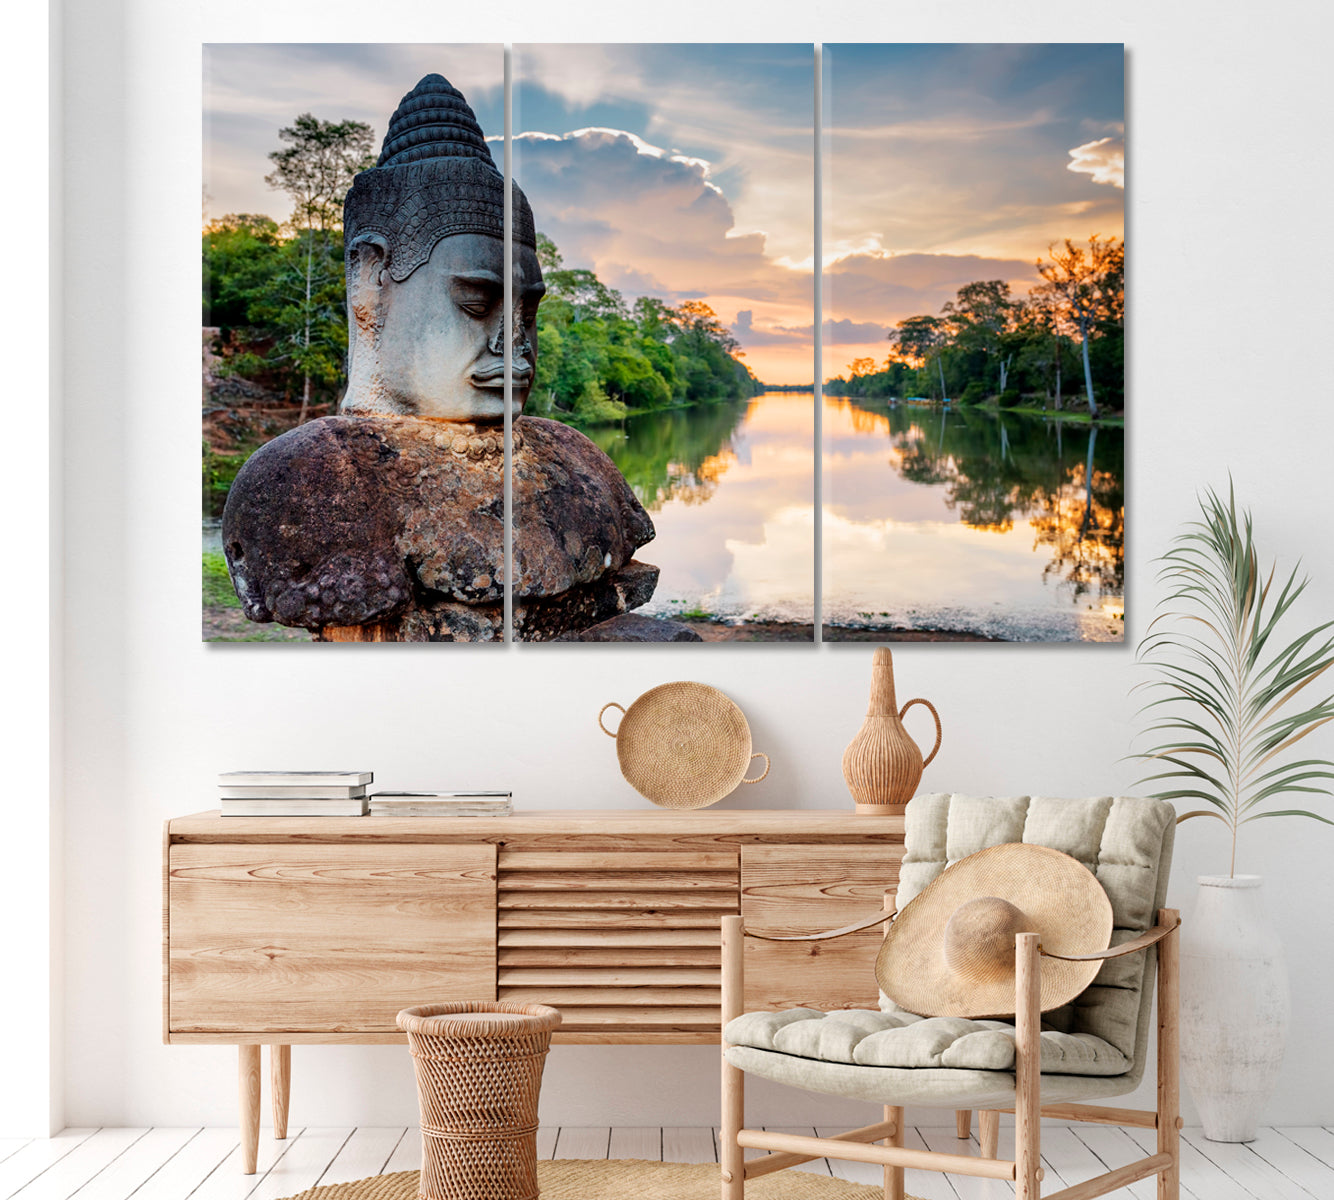 Ancient Statue near South Gate of Angkor Thom Cambodia Canvas Print ArtLexy 3 Panels 36"x24" inches 